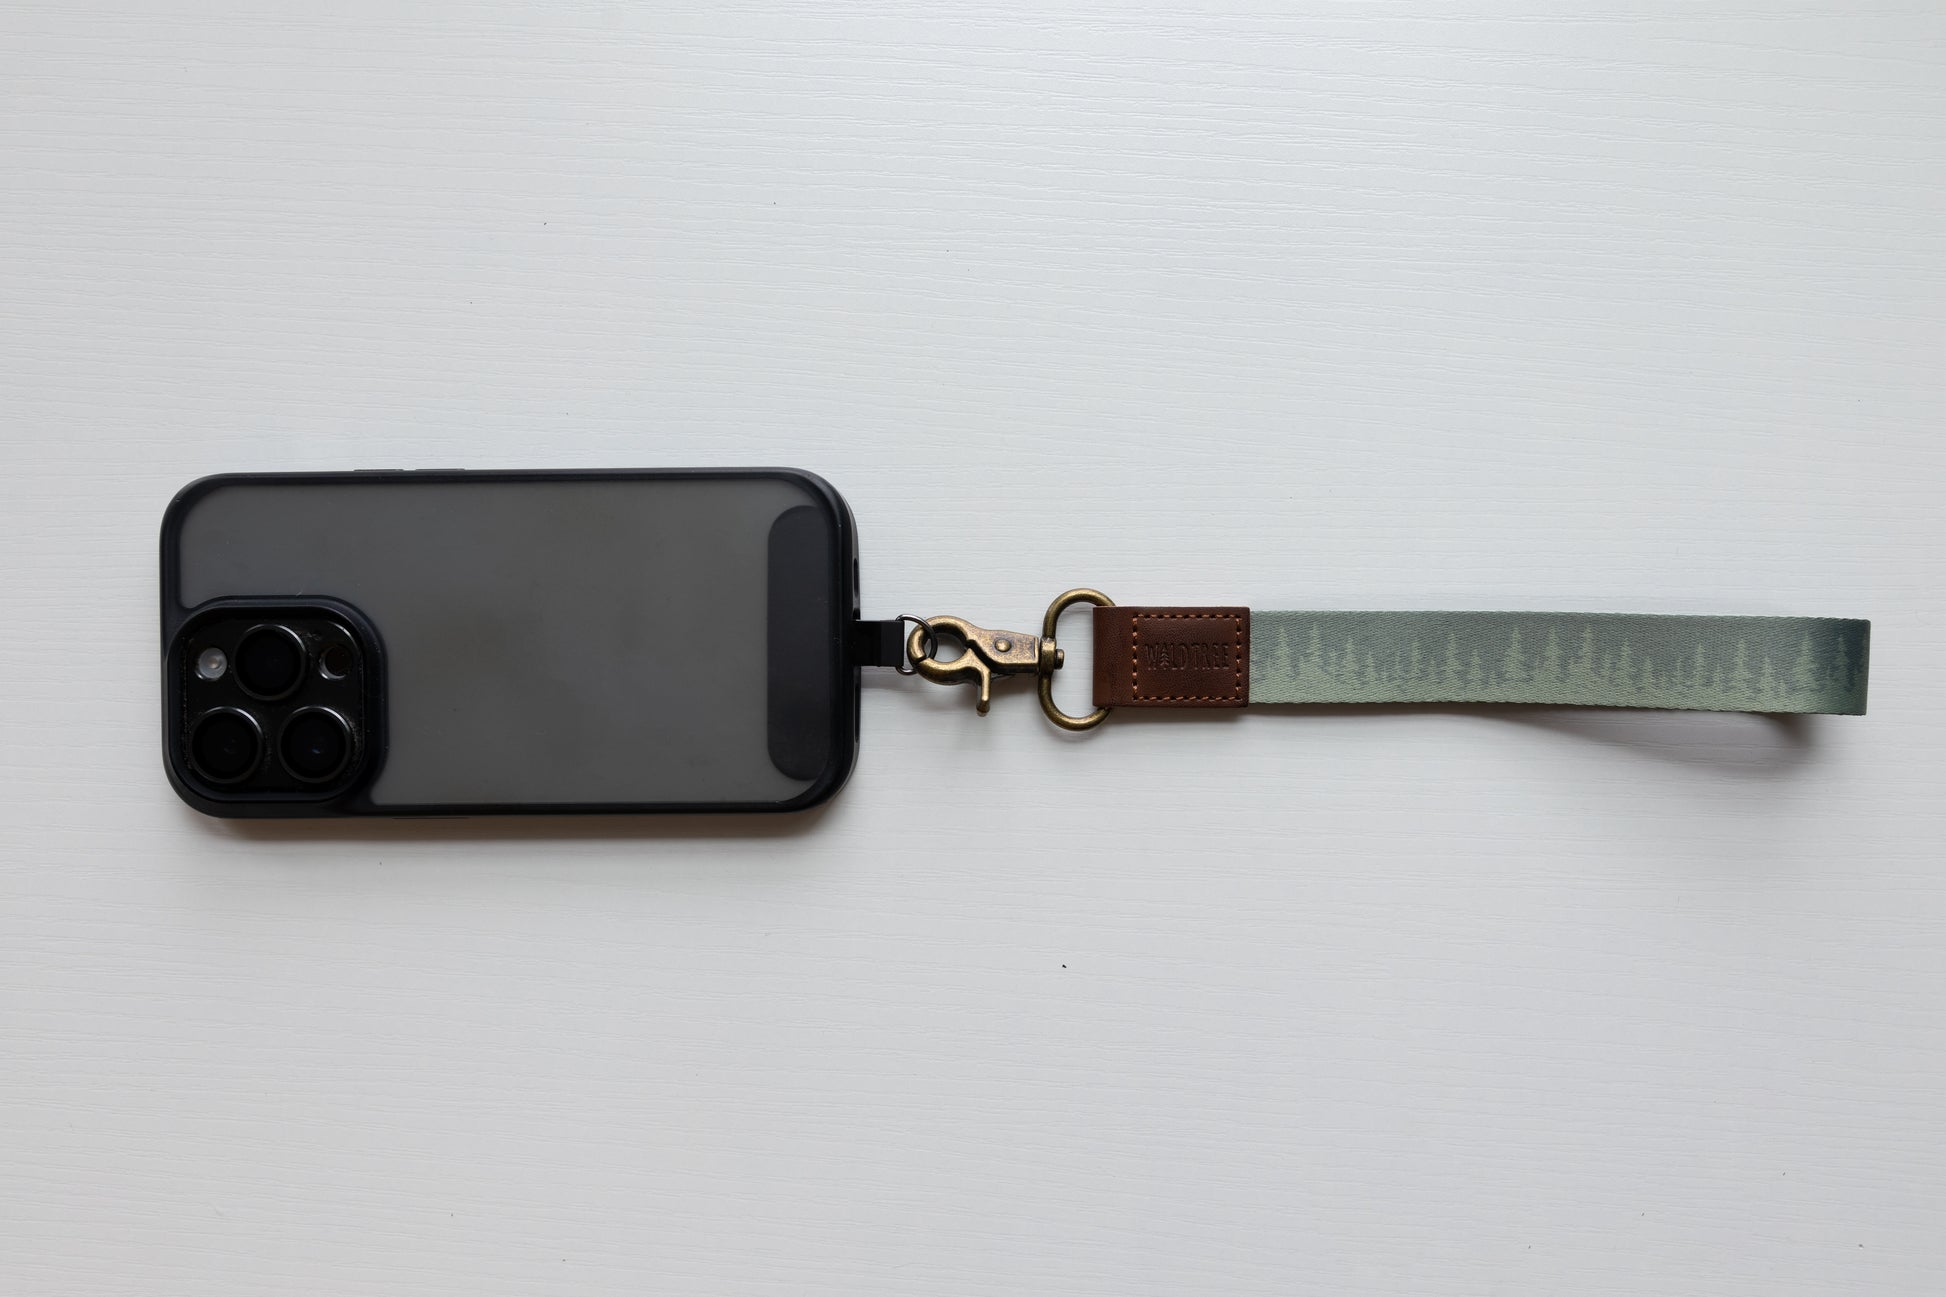 pinetree keychain attached to phone case